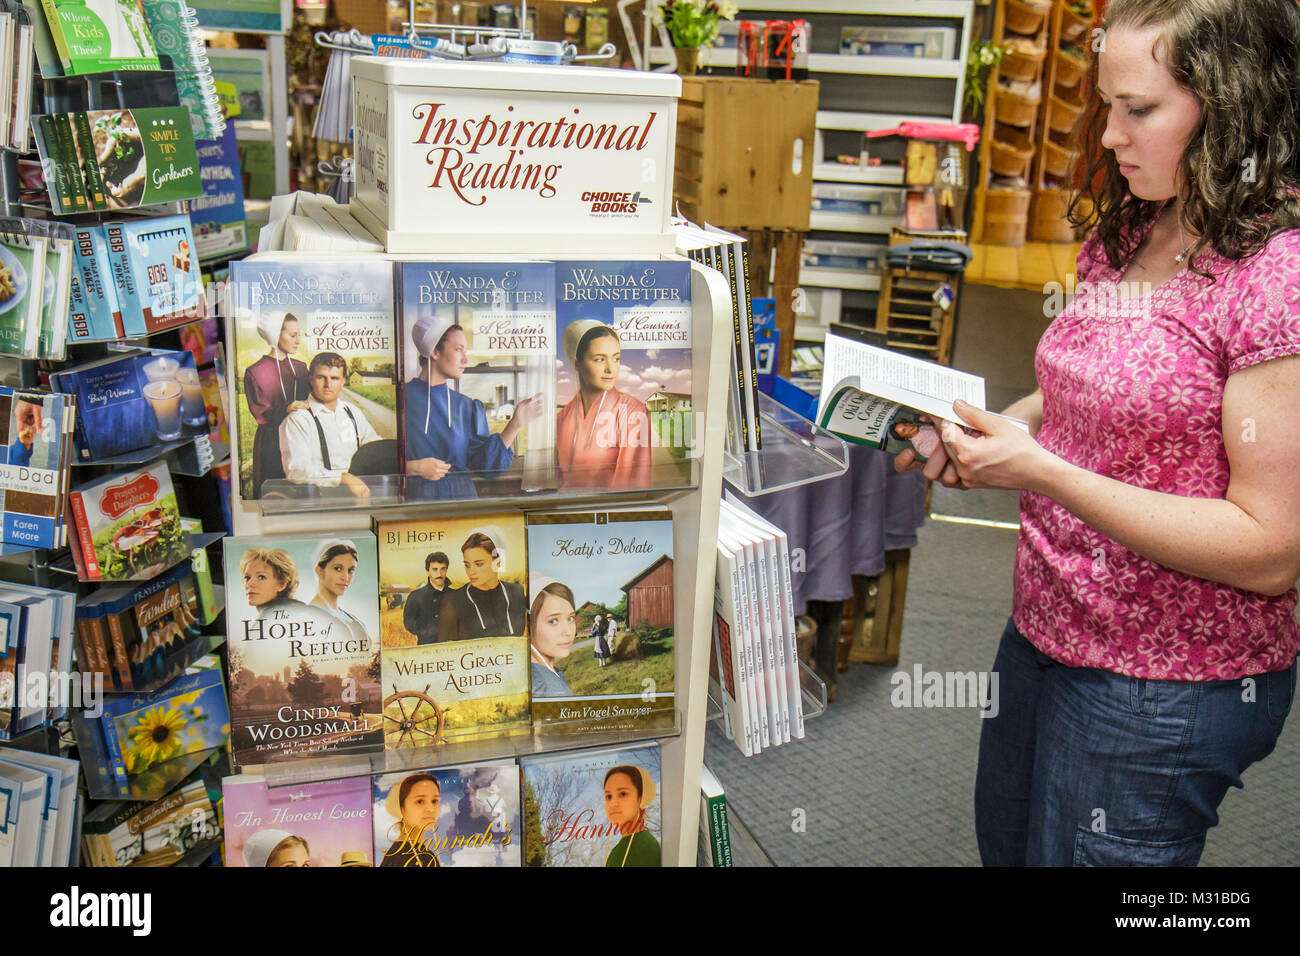 Pennsylvania,PA,Northeastern,Strasburg,Dutch Country,Hershey Farm,country store,gift shop,woman female women,young adult,book,books,paperback,Indiana Stock Photo